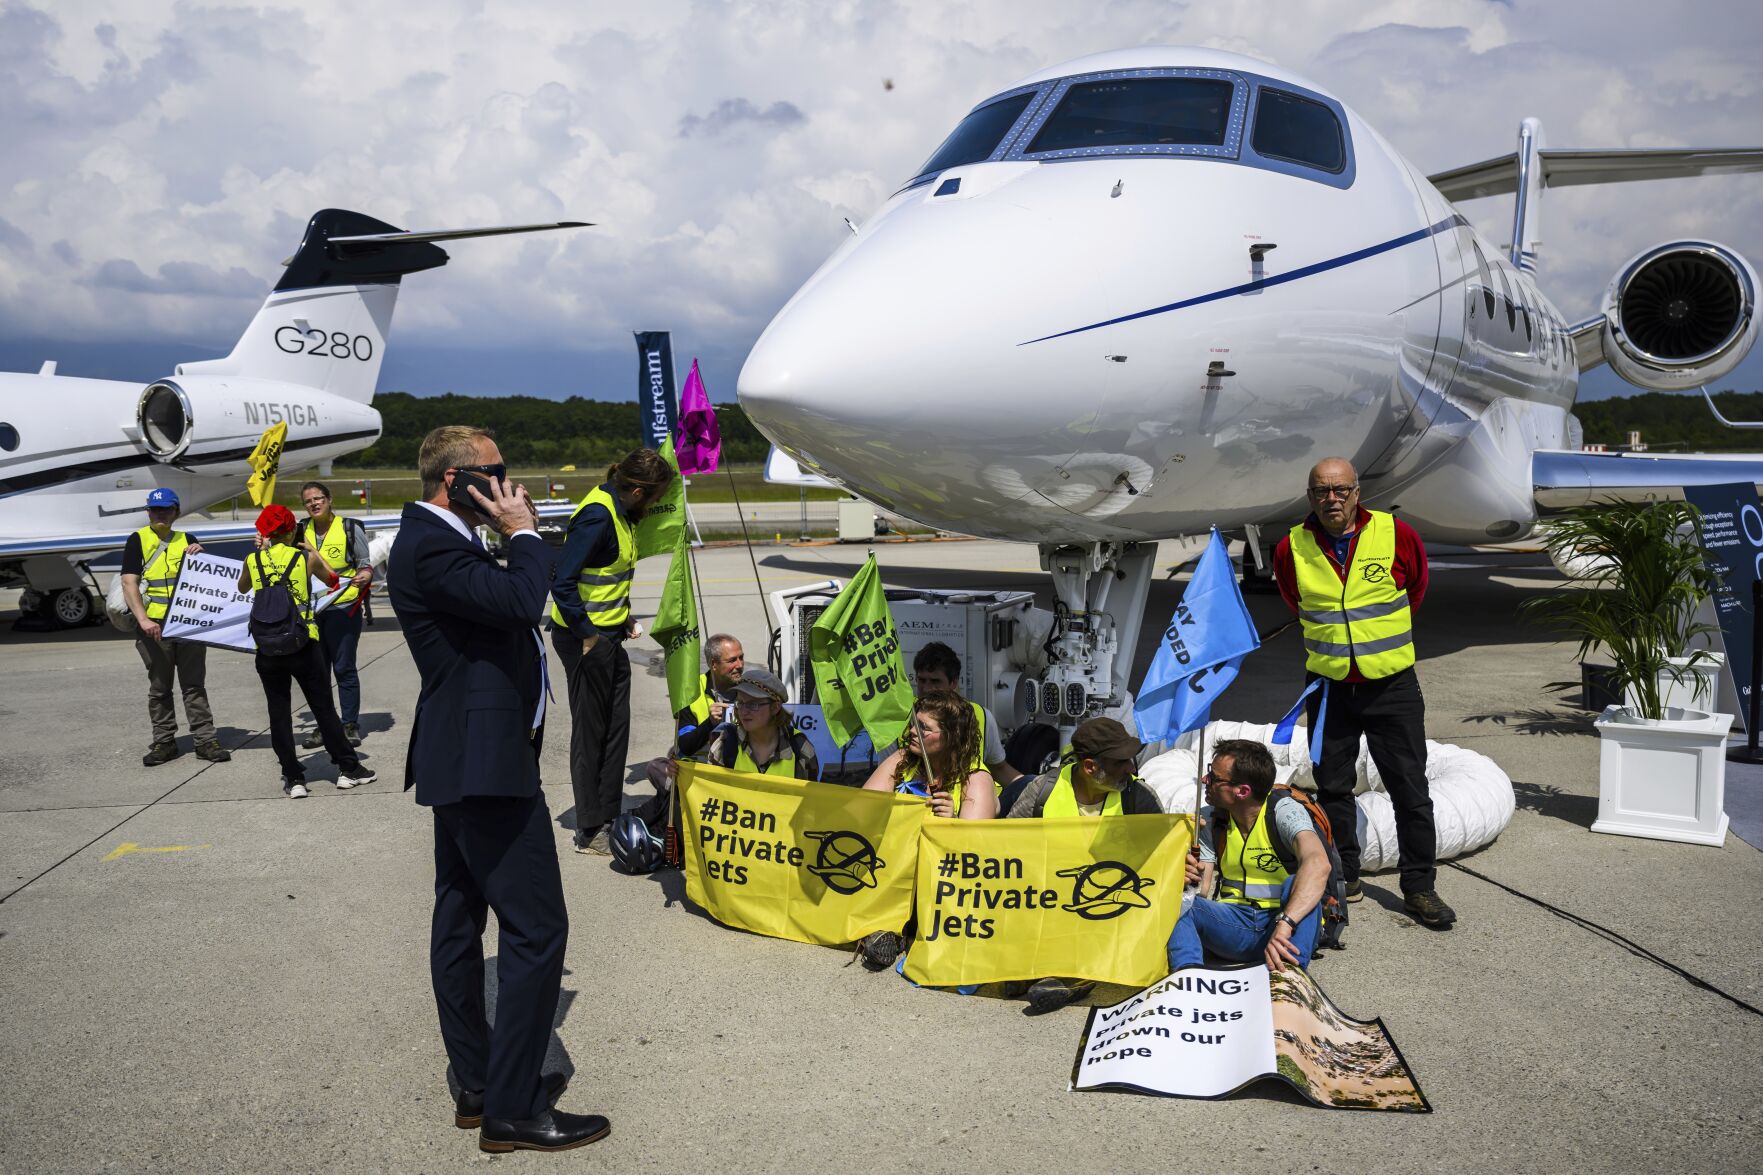 <p>FILE - Environmental activists of Stay Grounded and Greenpeace demonstrate while handcuffing themselves to a plane during the European Business Aviation Convention and Exhibition (EBACE), at the Geneve Aeroport in Geneva, Switzerland, May 23, 2023. Climate activists have spraypainted a superyacht, blocked private jets from taking off and plugged holes in golf courses this summer as part of an intensifying campaign against the emissions-spewing lifestyles of the ultrawealthy. (Laurent Gillieron/Keystone via AP, File)</p>   PHOTO CREDIT: LAURENT GILLIERON 